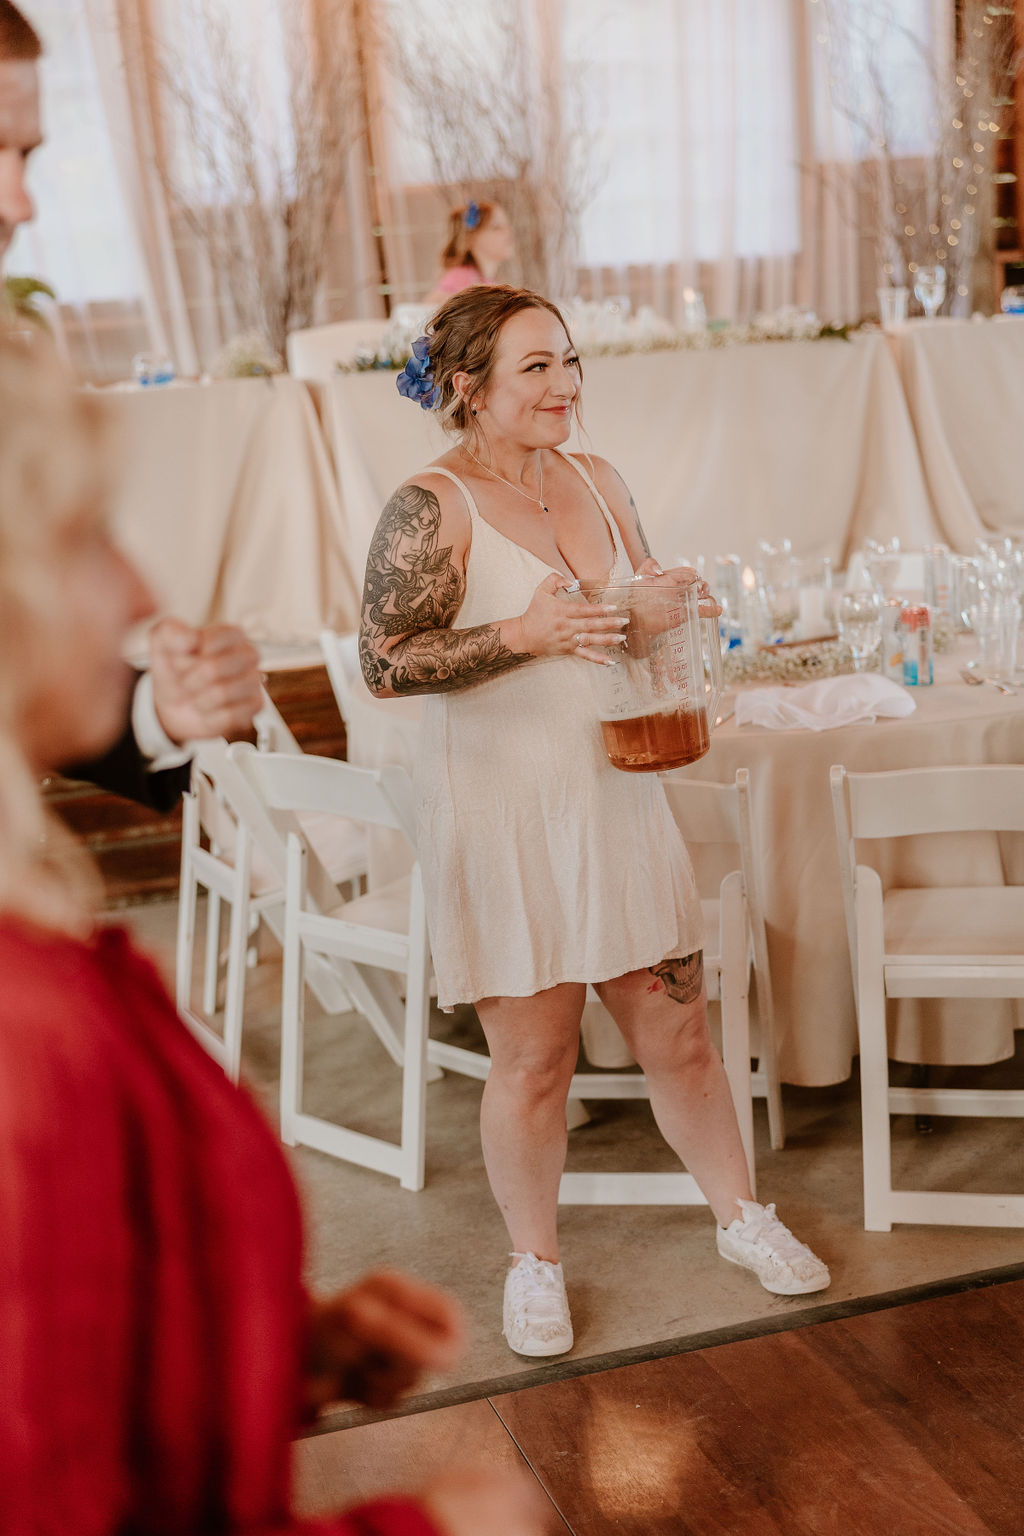 A bride, dressed in a short white dress, holding a large pitcher, smiles during the reception.